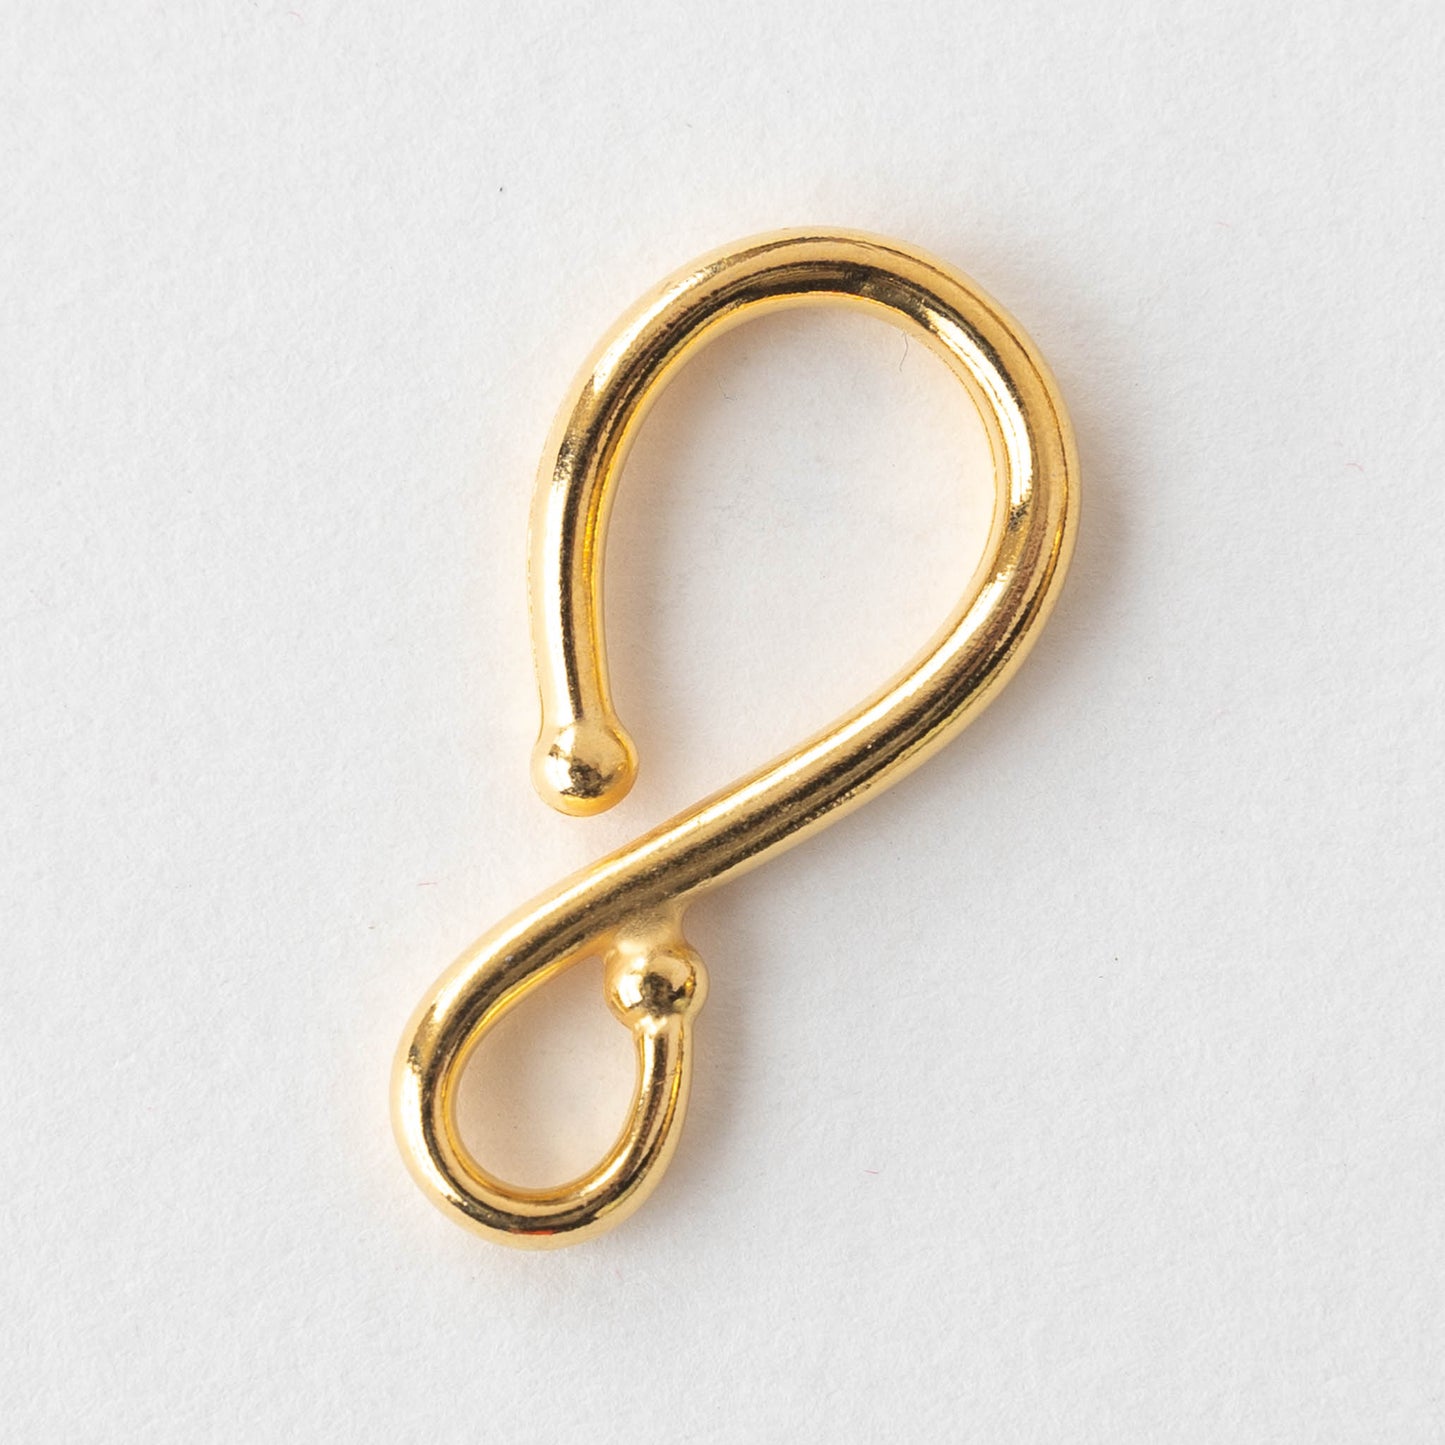 33mm Large Necklace Hook Clasp - Gold - 1 Clasp